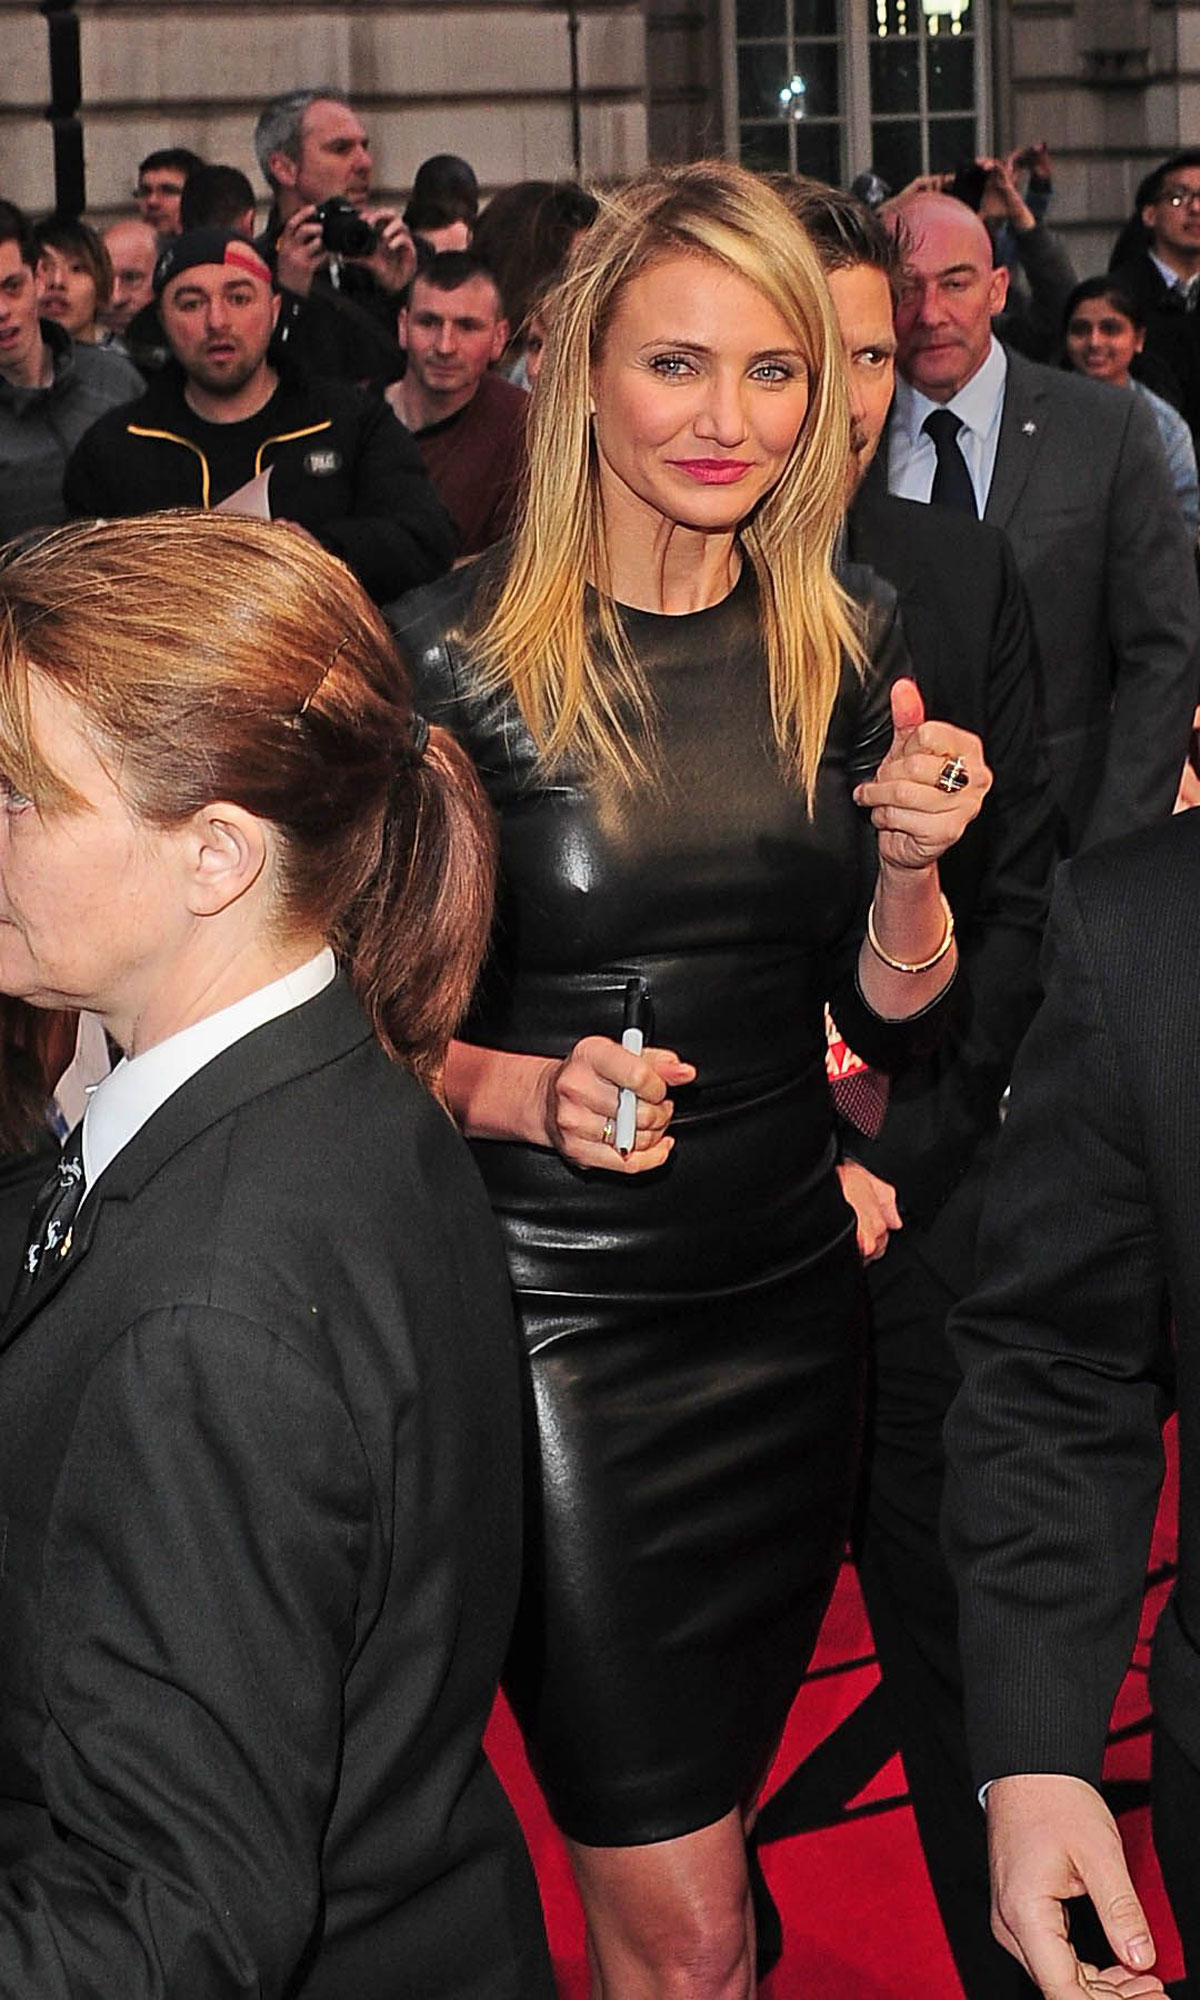 Cameron Diaz attends UK Gala premiere of The Other Woman